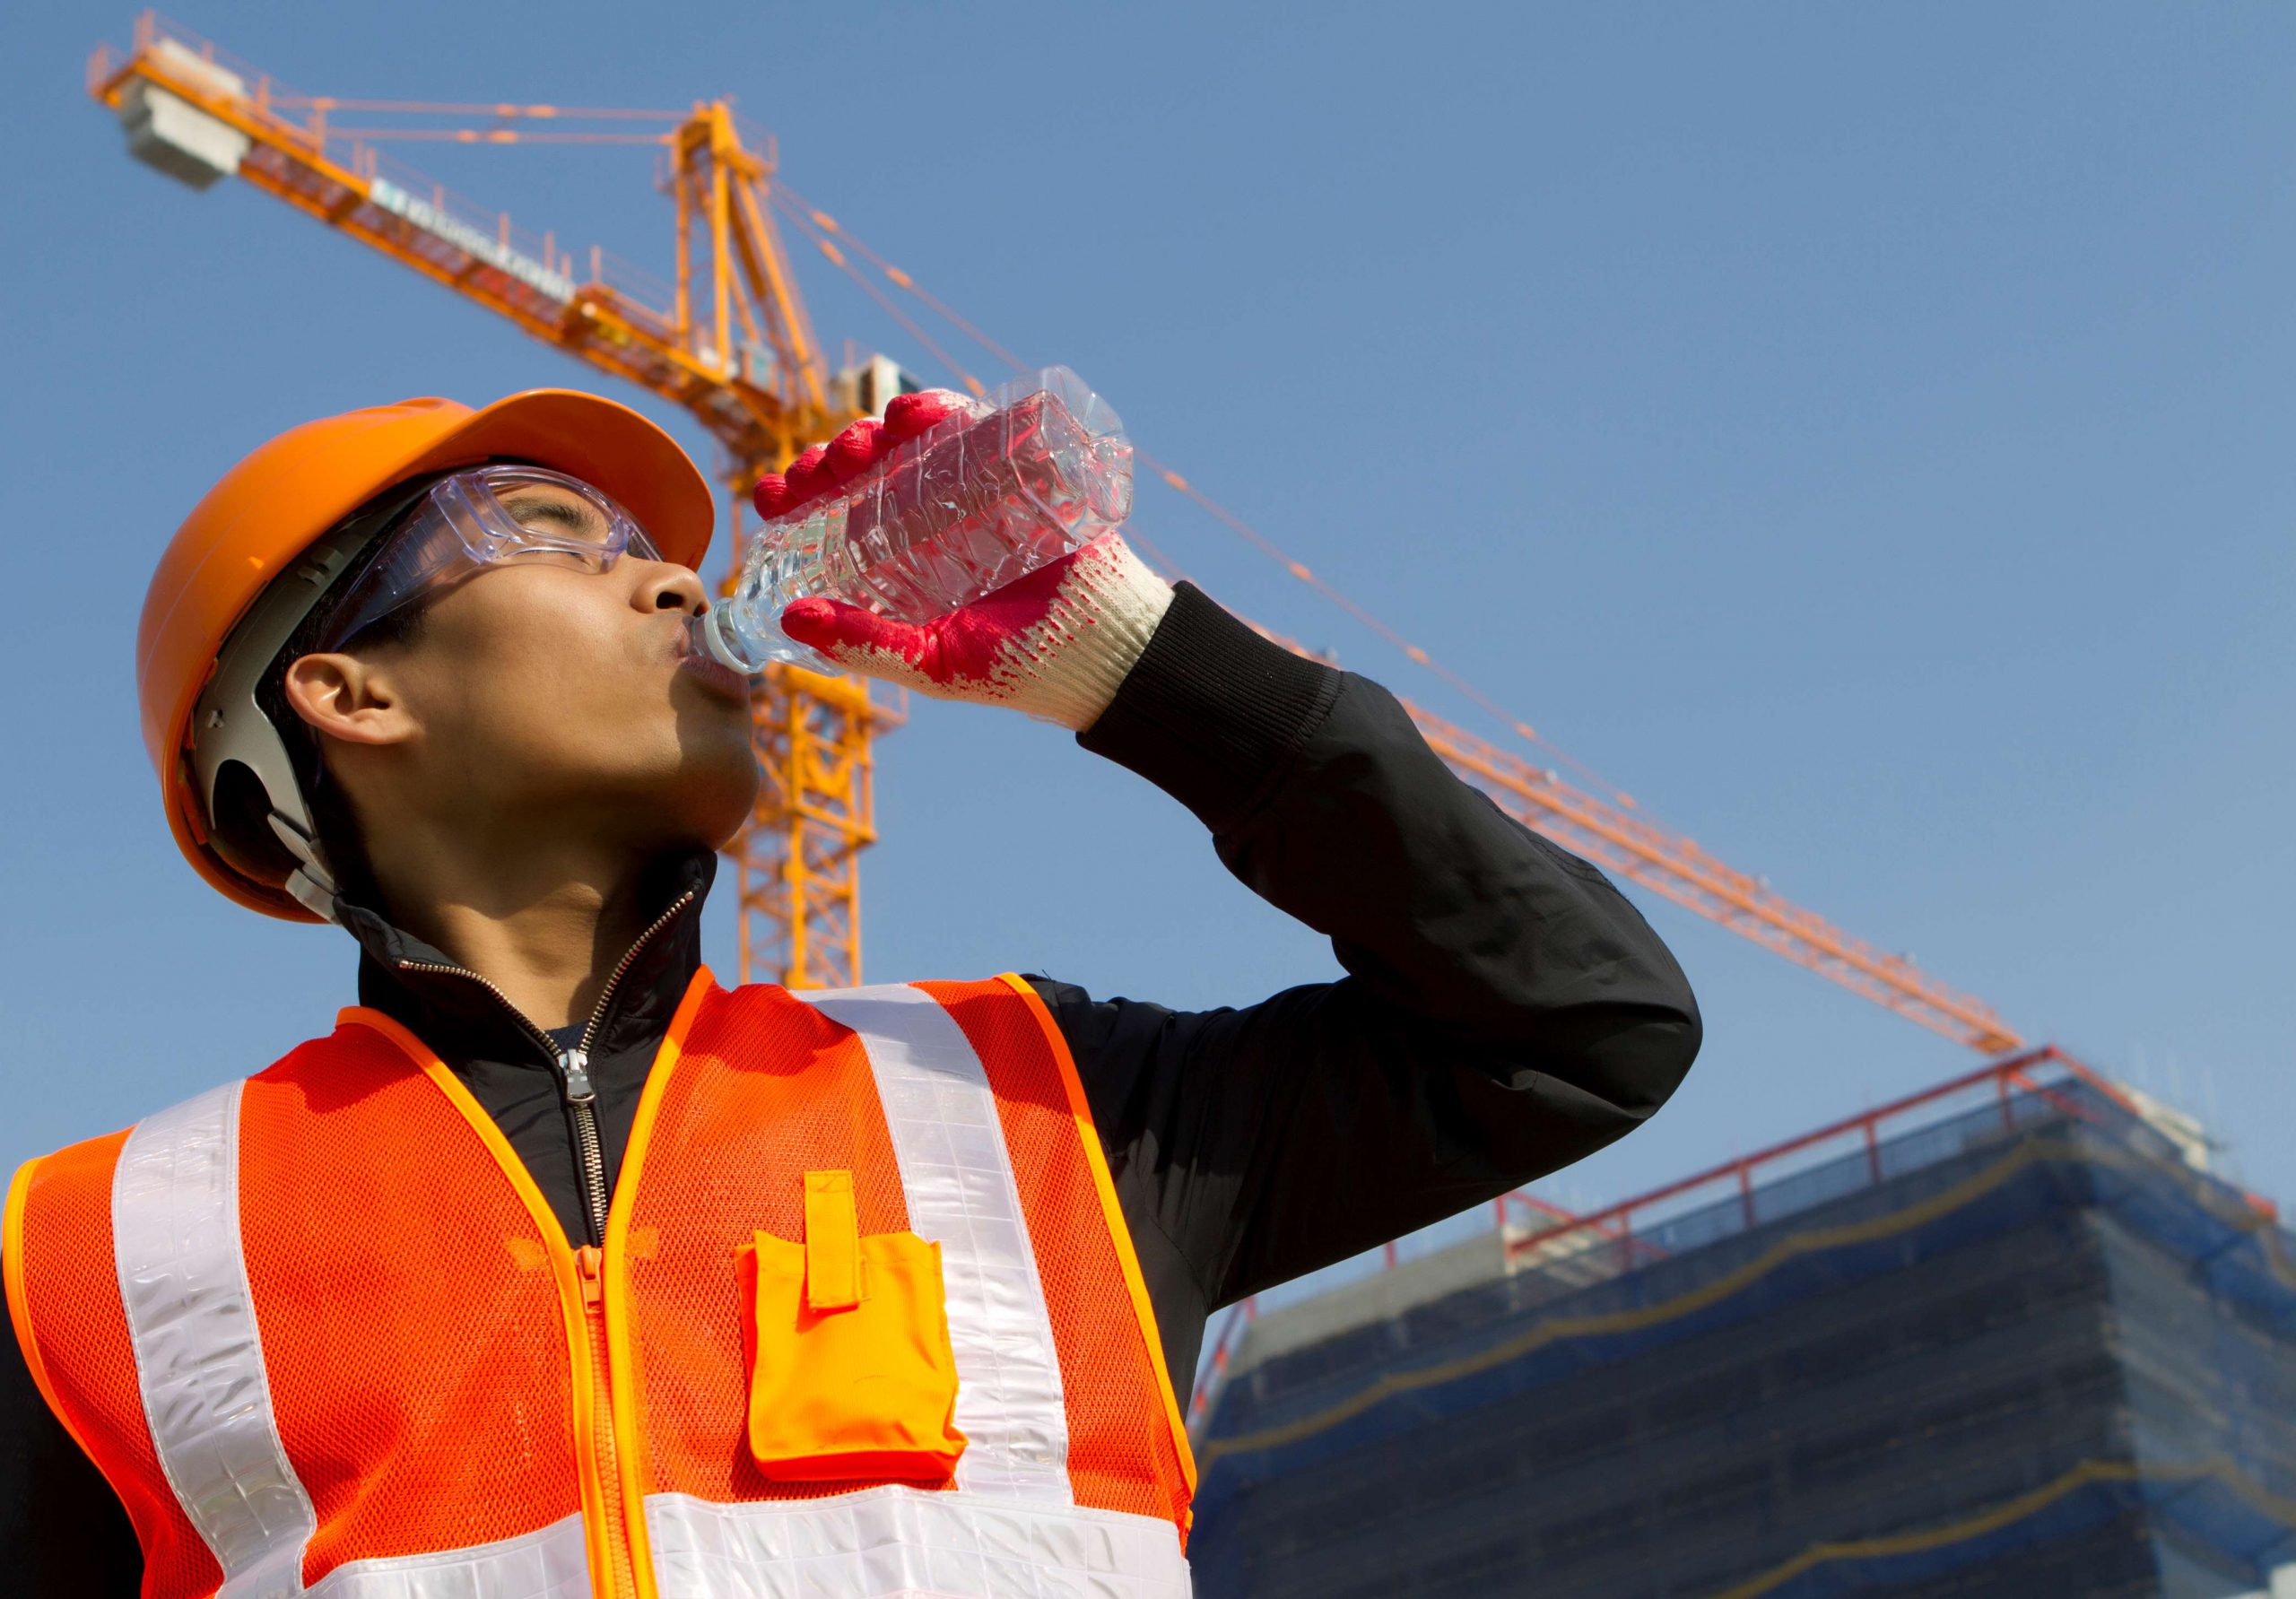 Construction Summer Safety Tips With The Fortress Development Solutions Team. Beating The Heat Is Easy With These Top Construction Safety Tips.